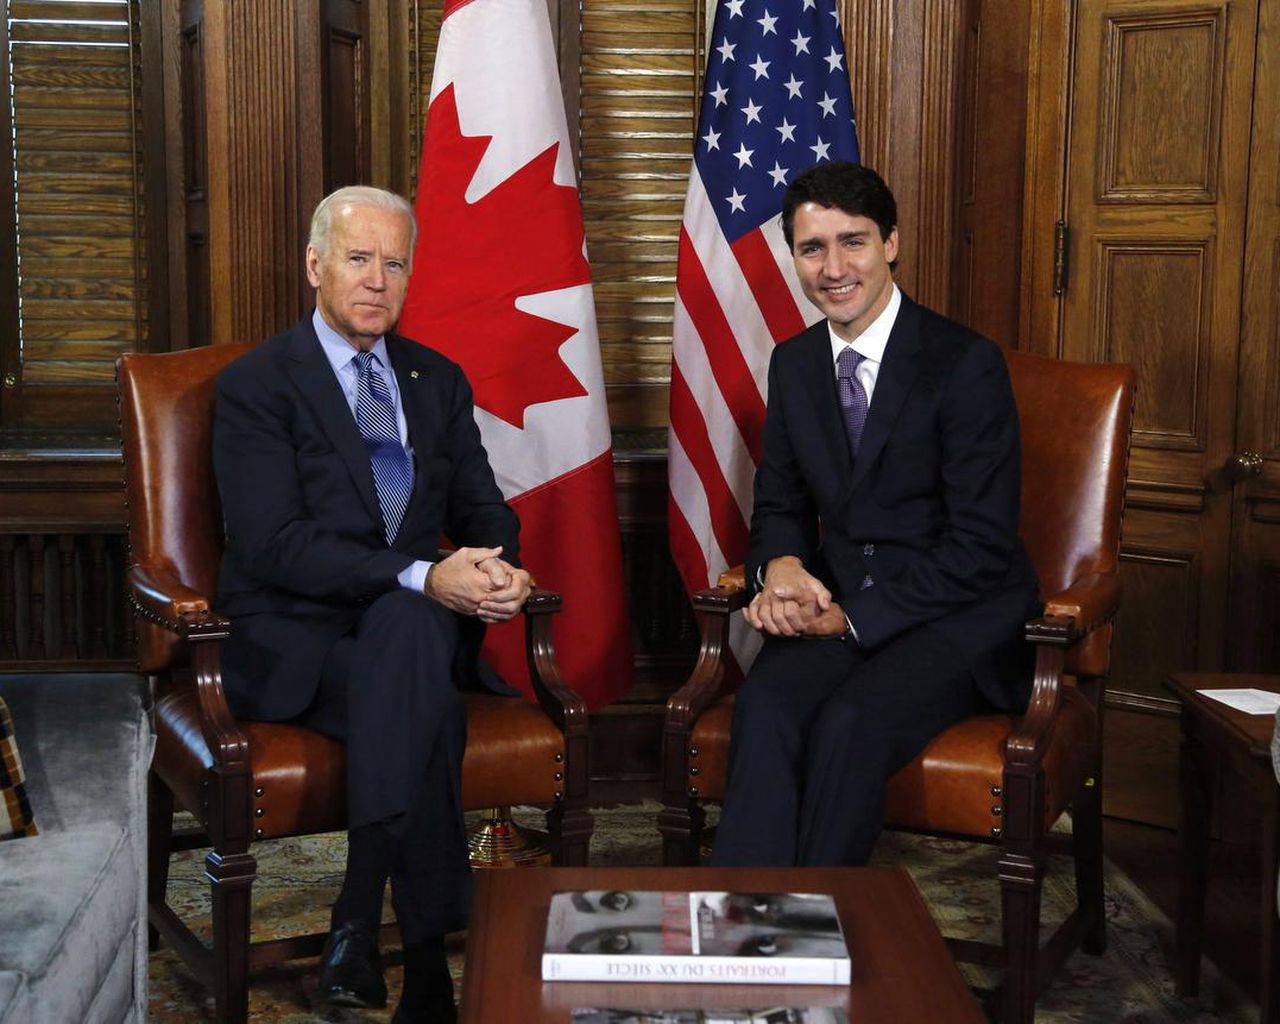 Biden, Trudeau agree to meet after tensions under Trump administration